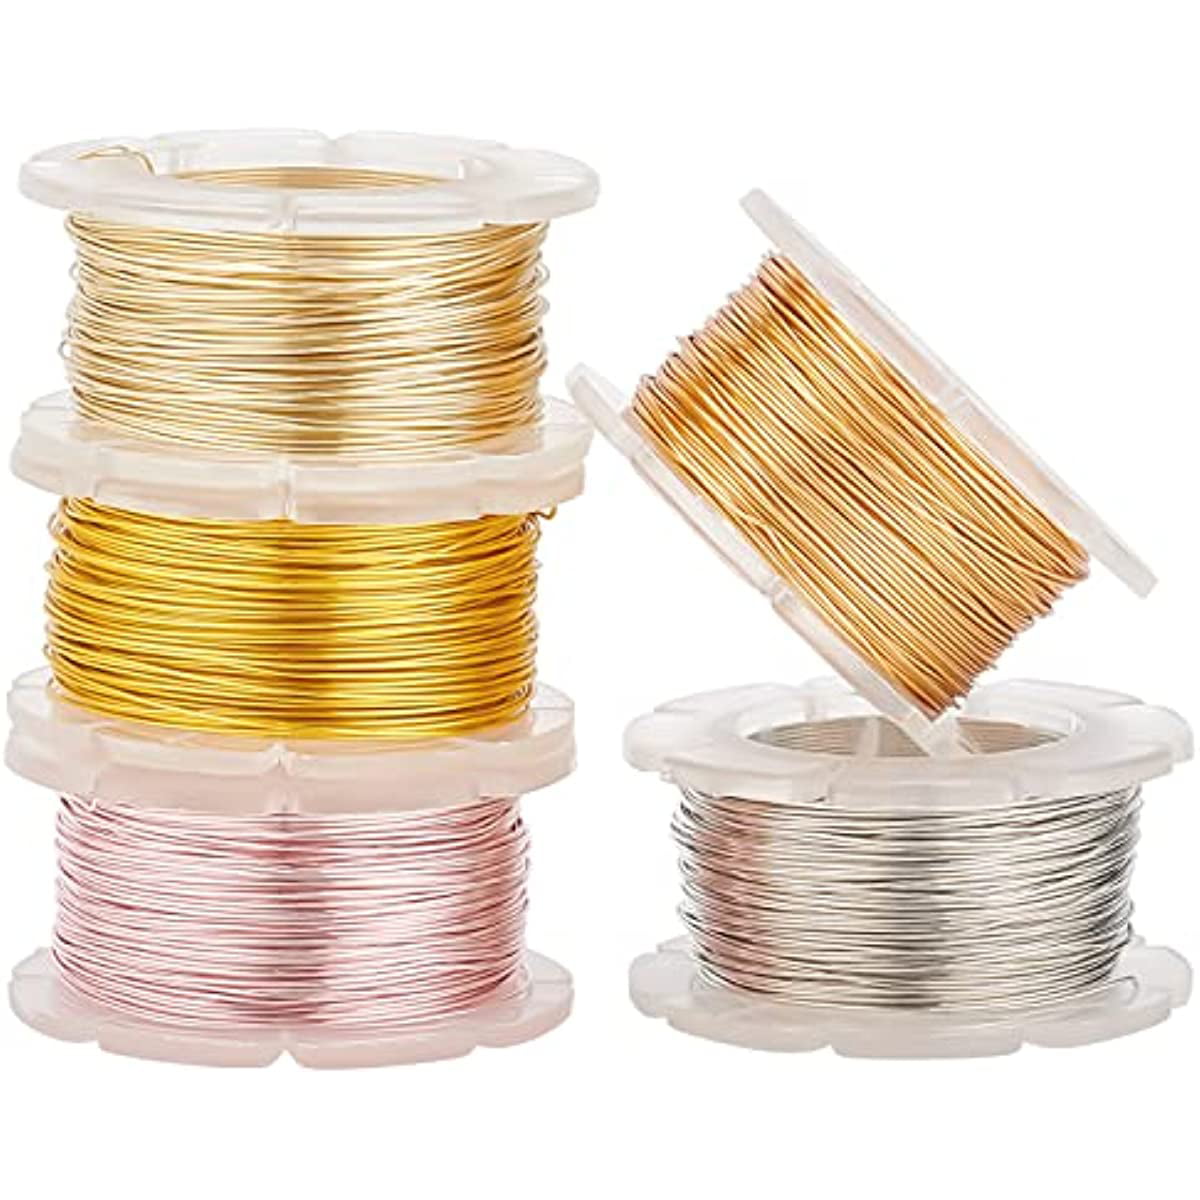 MIKIMIQI 328Ft Jewelry Wire Craft Wire 26 Gauge Tarnish Resistant